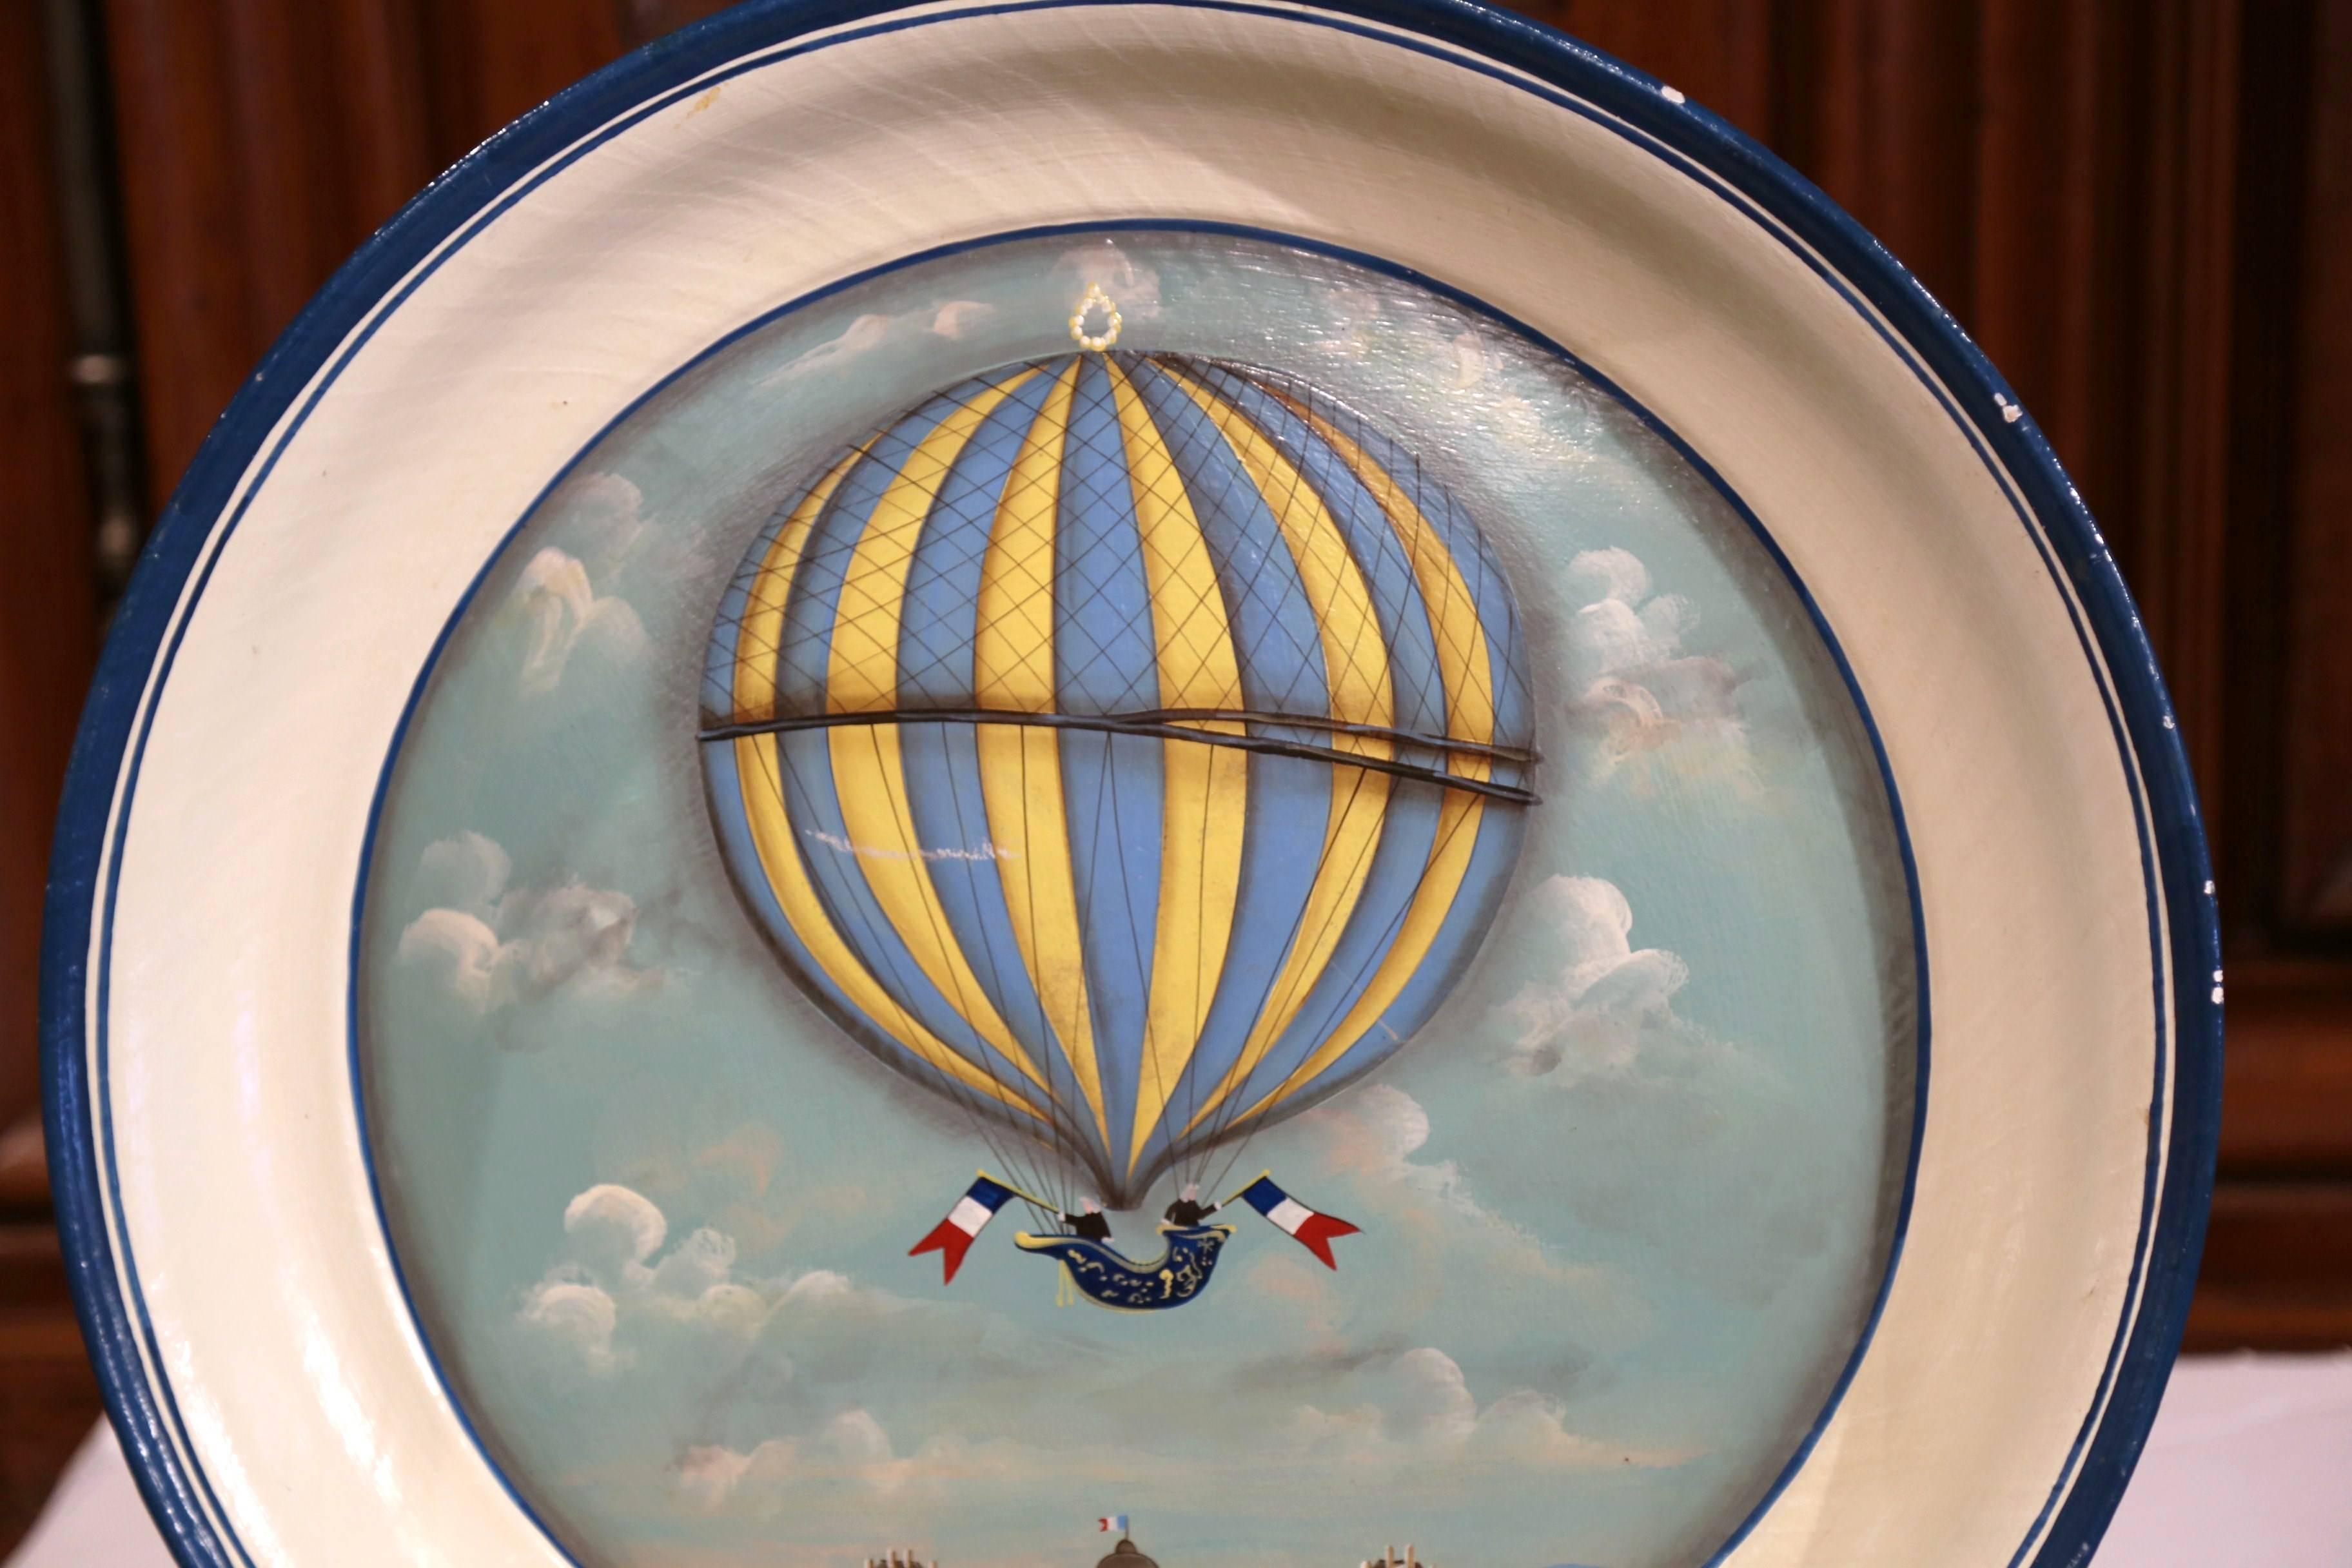 Contemporary Late 20th Century French Hand-Painted Tole Tray with Colorful Hot Air Balloon